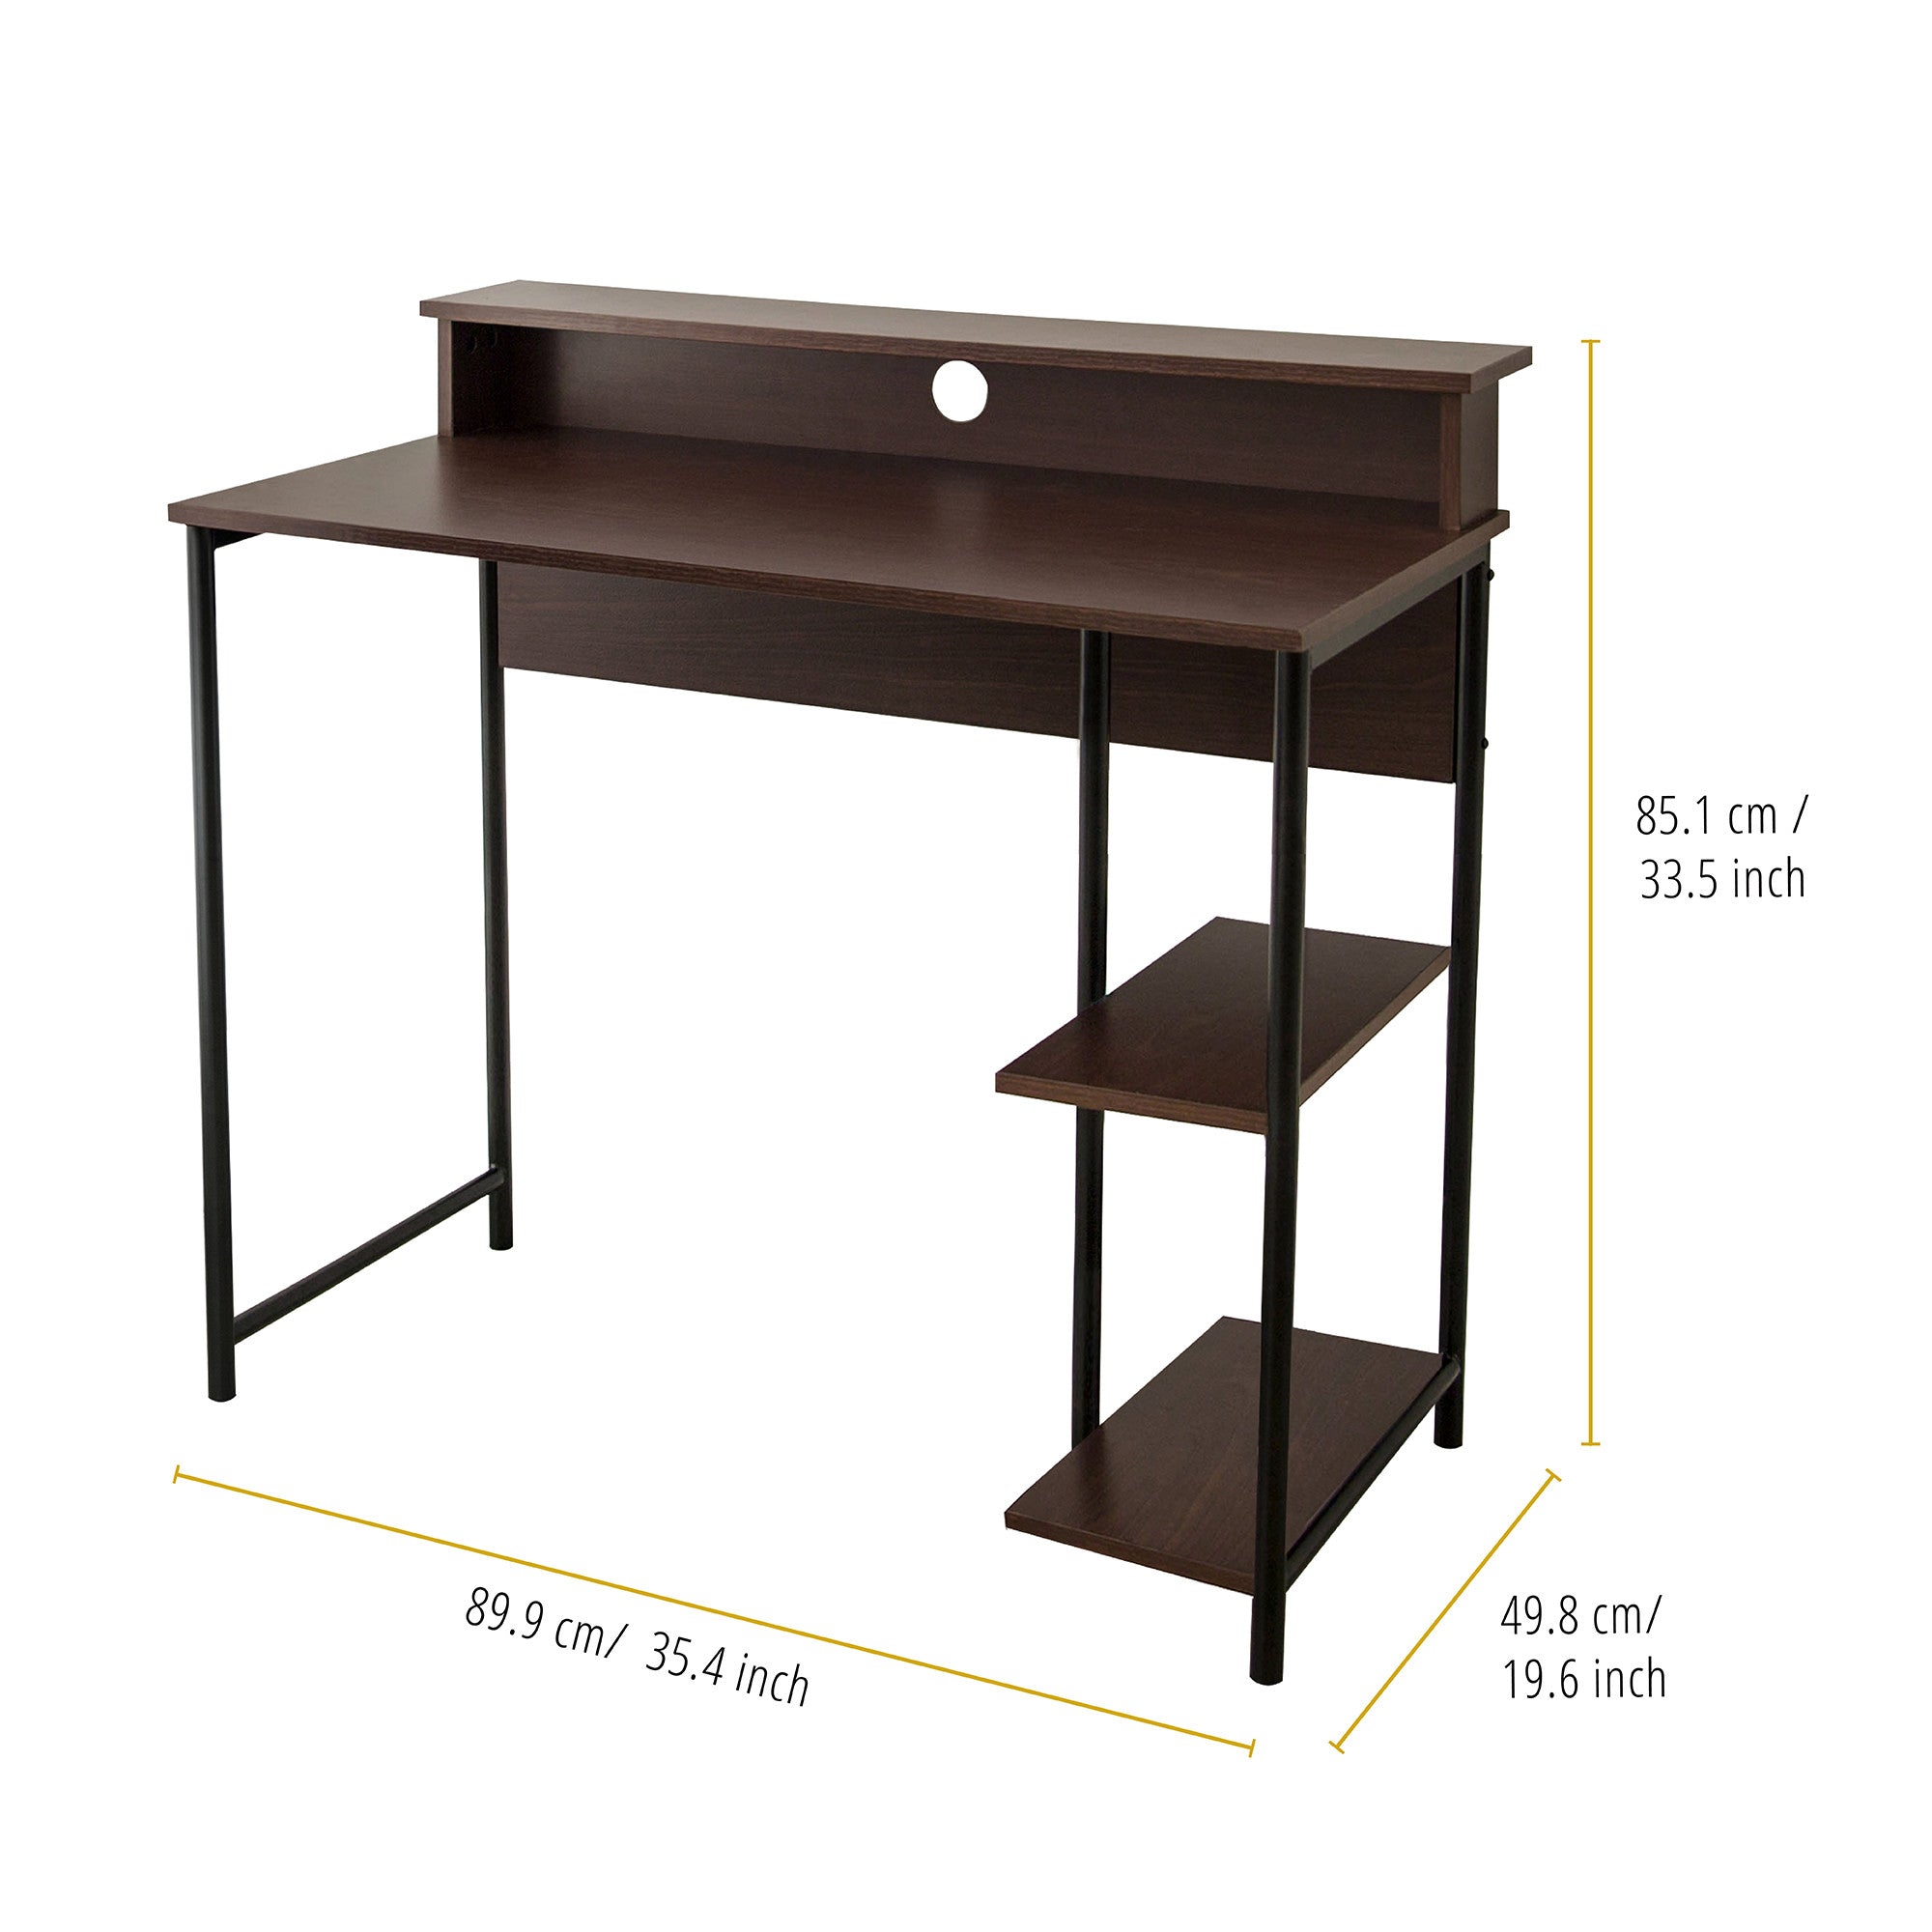 Teamson Home 35" Wooden Home Office Computer Desk with Metal Base and Storage, Natural/Black